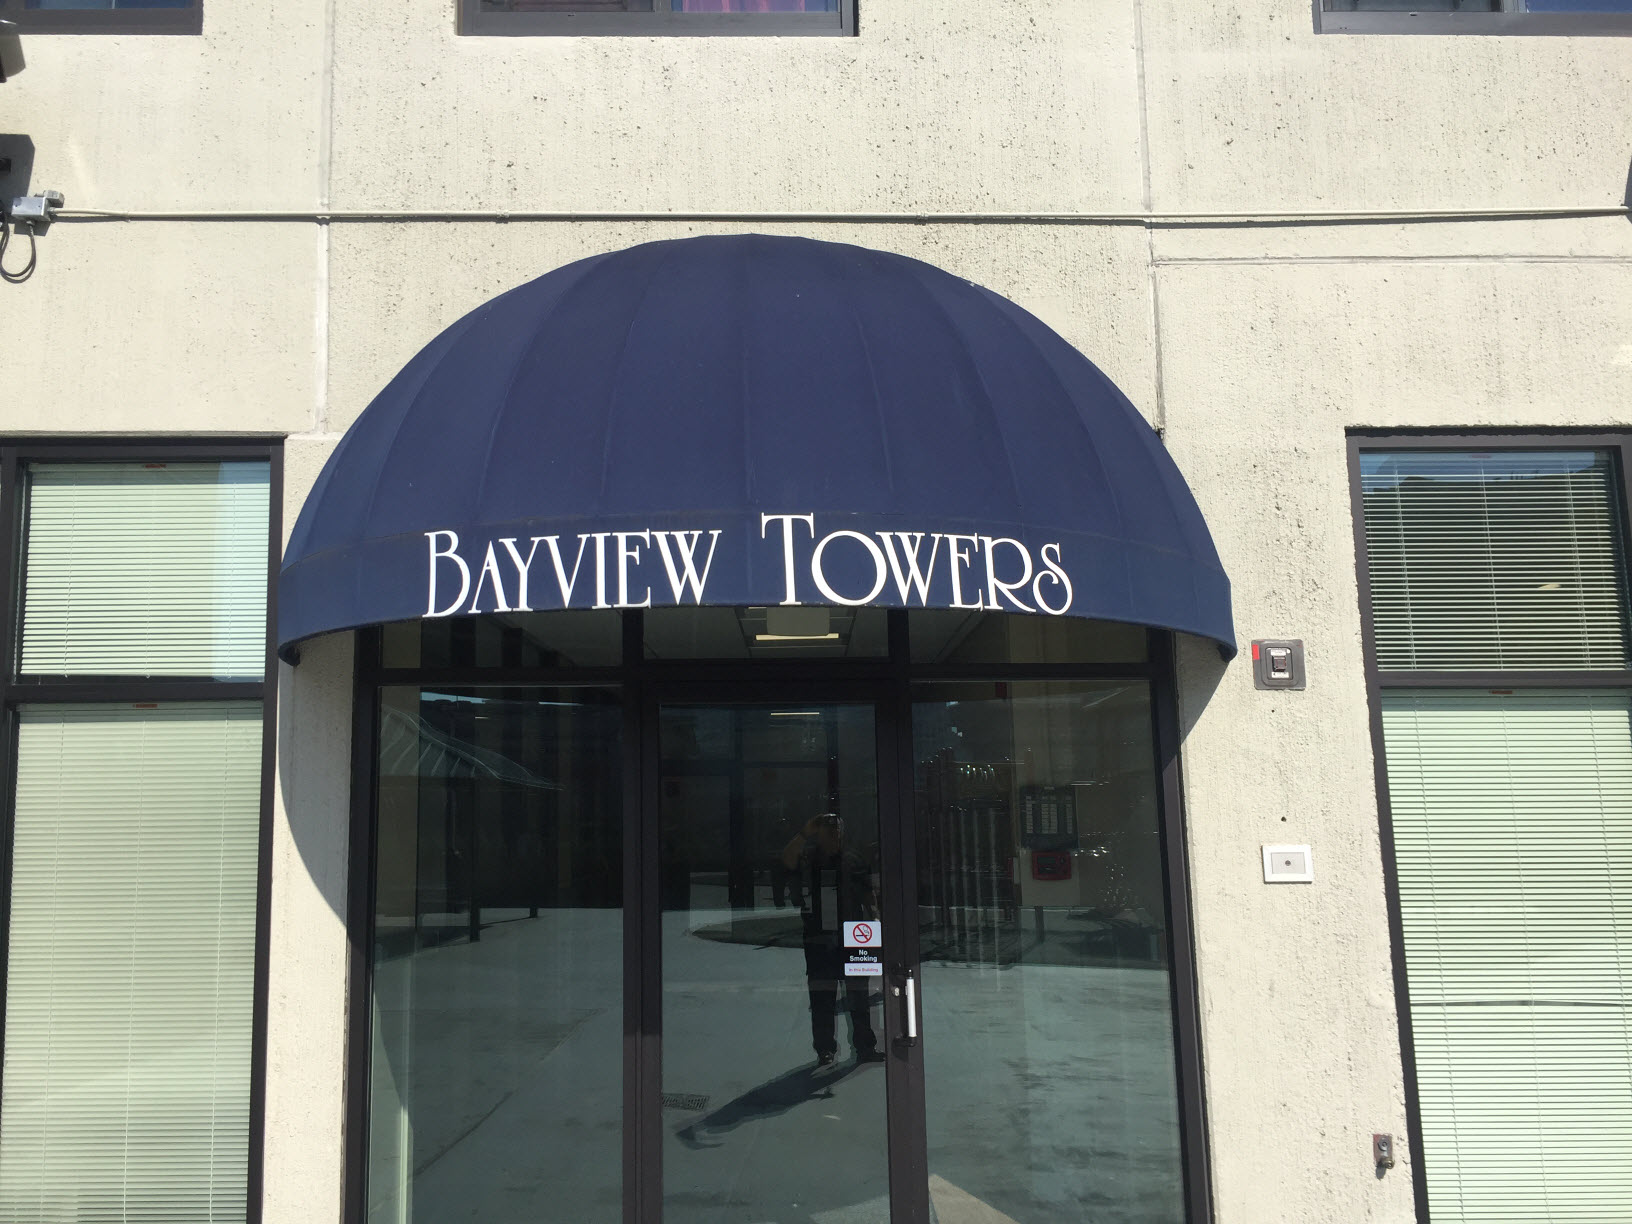 BAYVIEW TOWERS